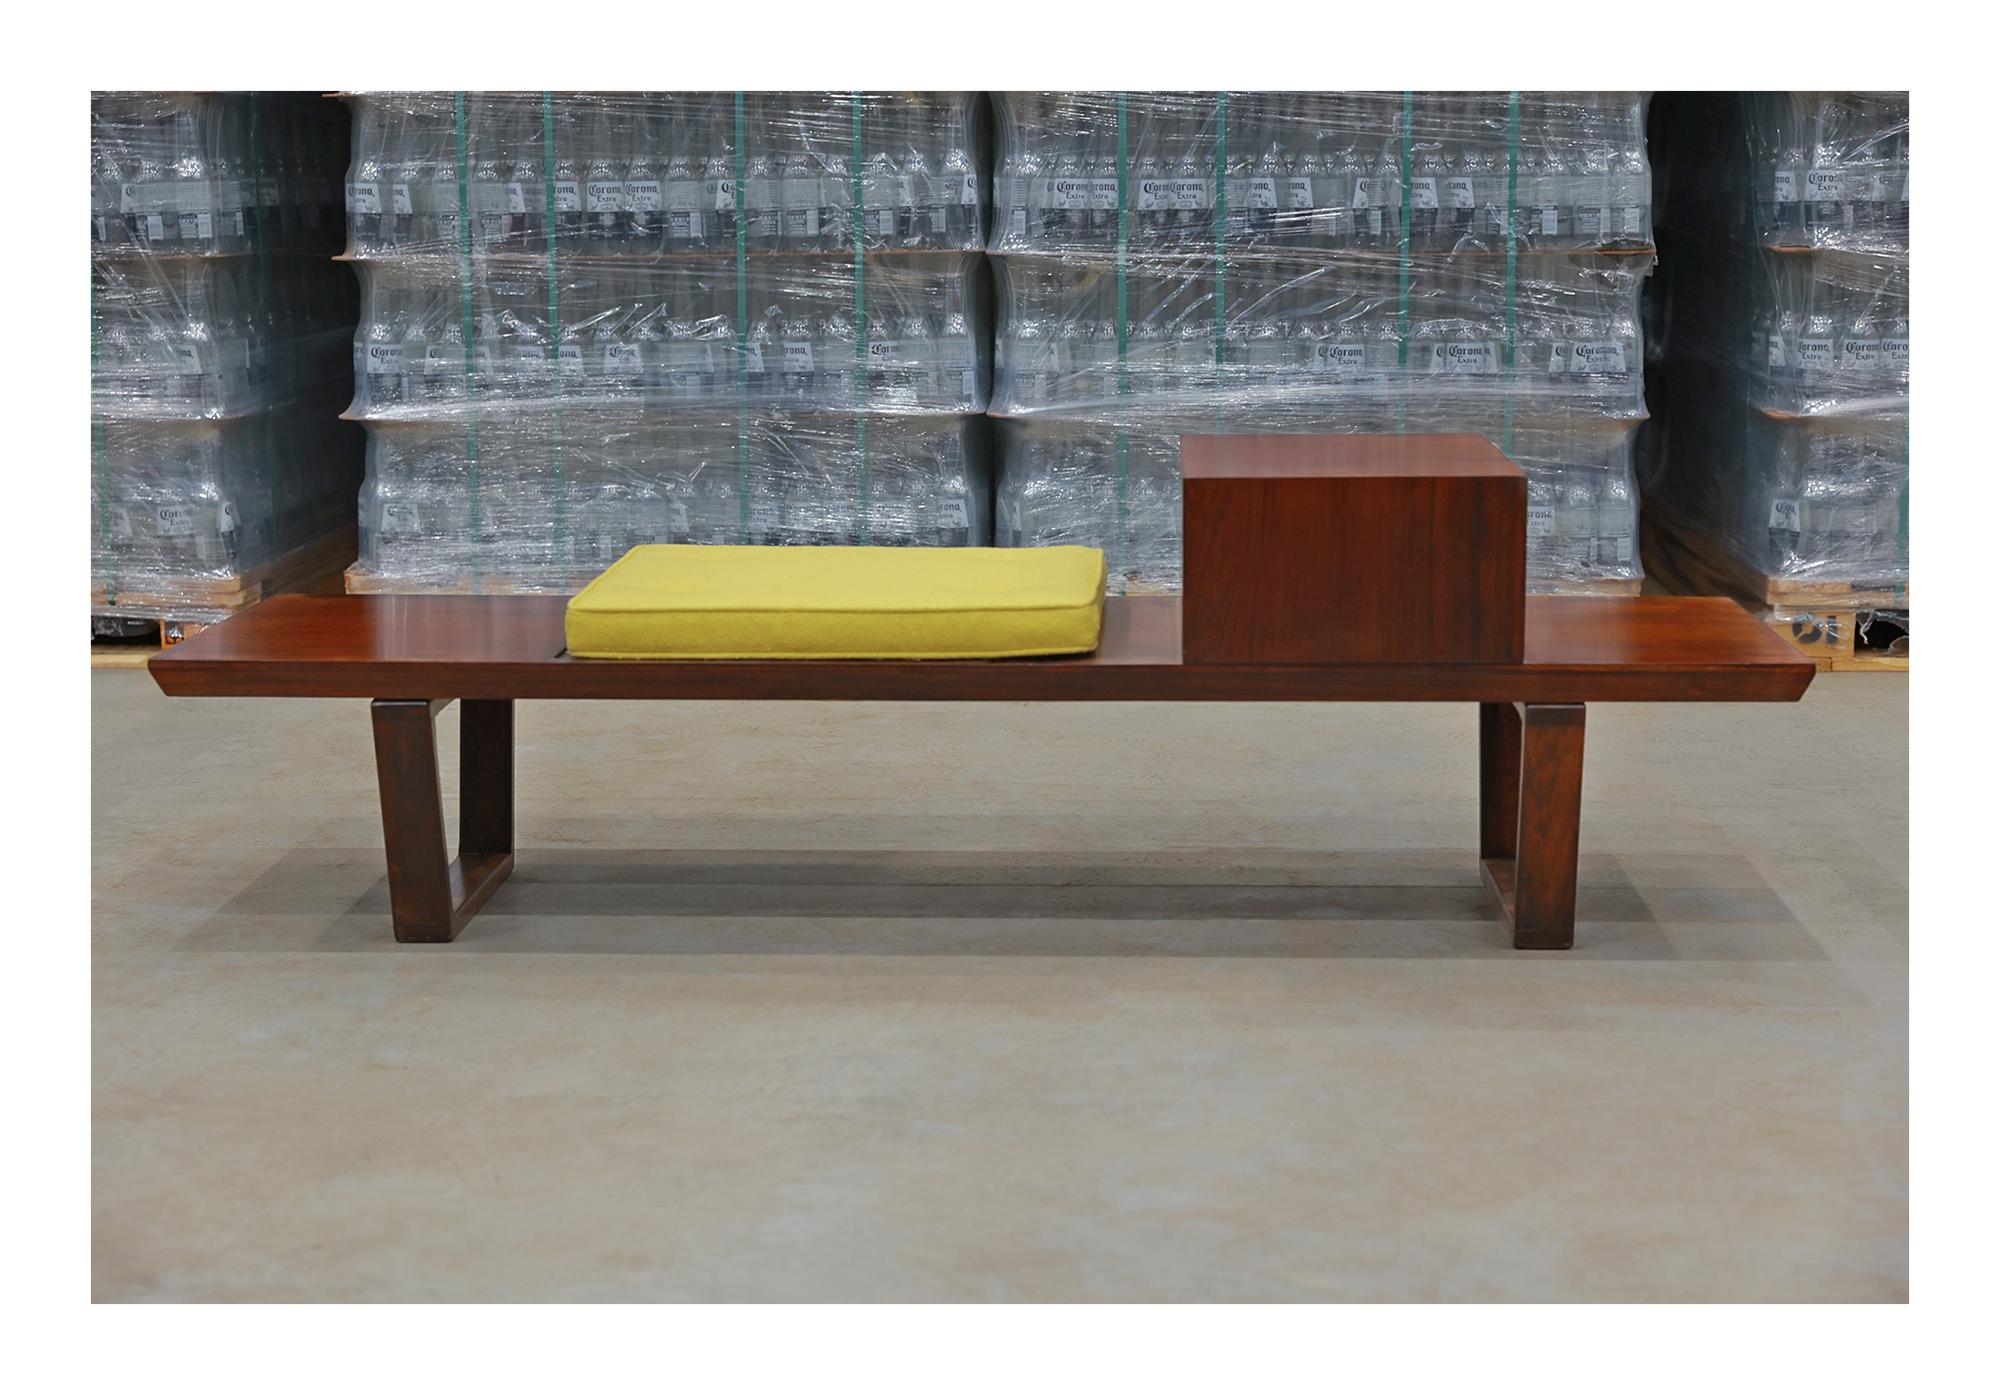 20th Century  Brazilian Modern Bench in Hardwood, by Carlo Hauner for Forma, Brazil, c. 1950 For Sale